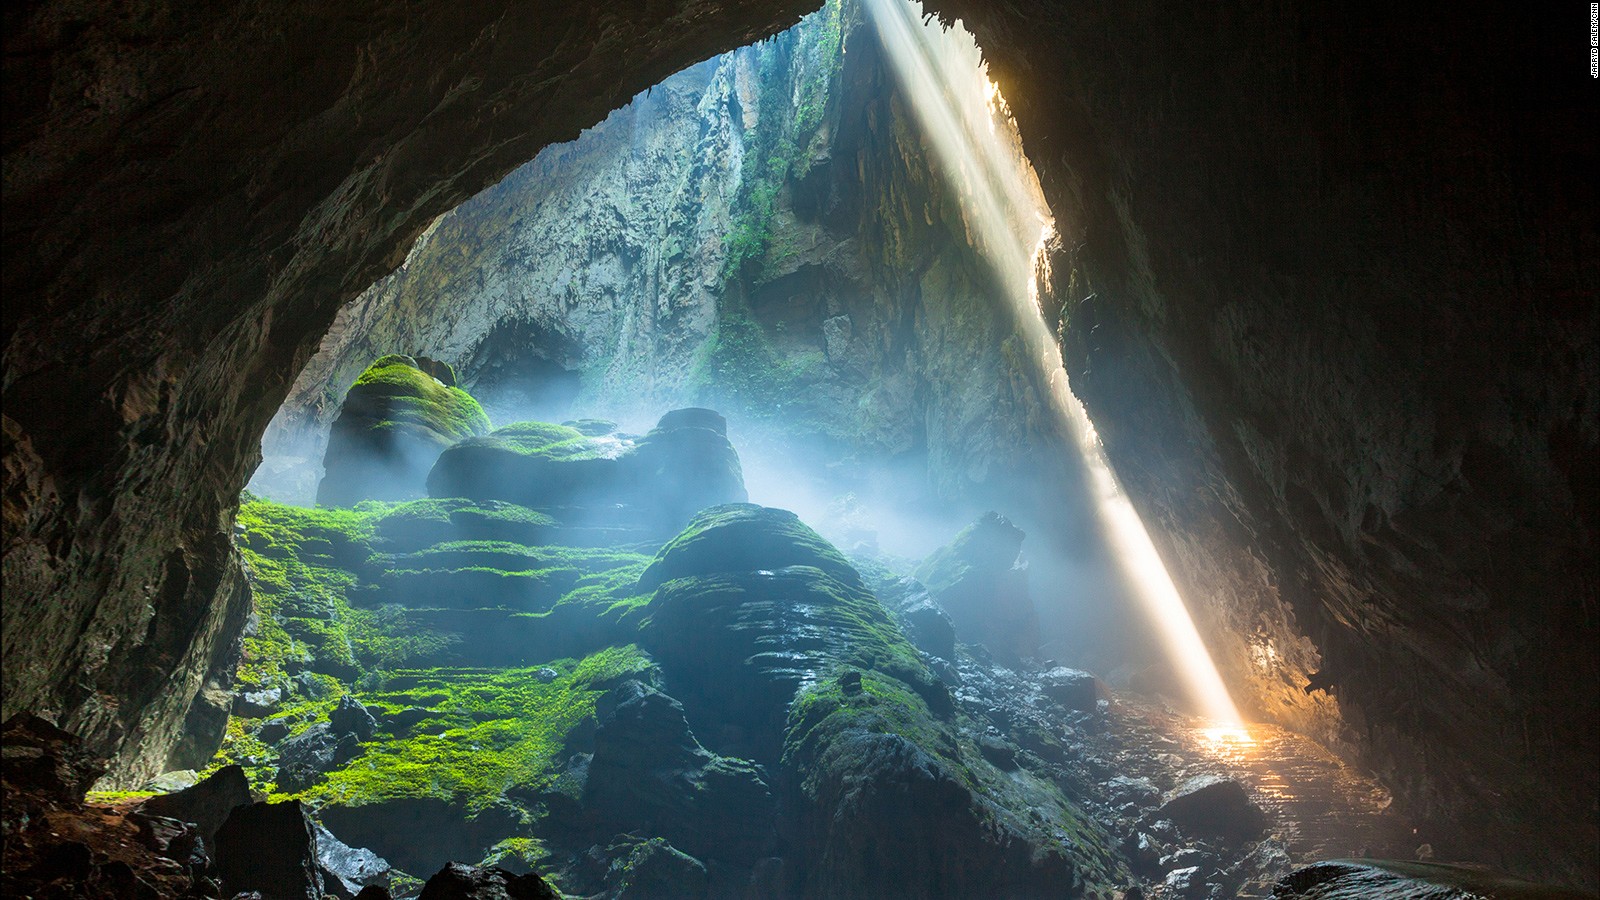 See world's largest cave, Hang Son Doong, in Vietnam | CNN Travel